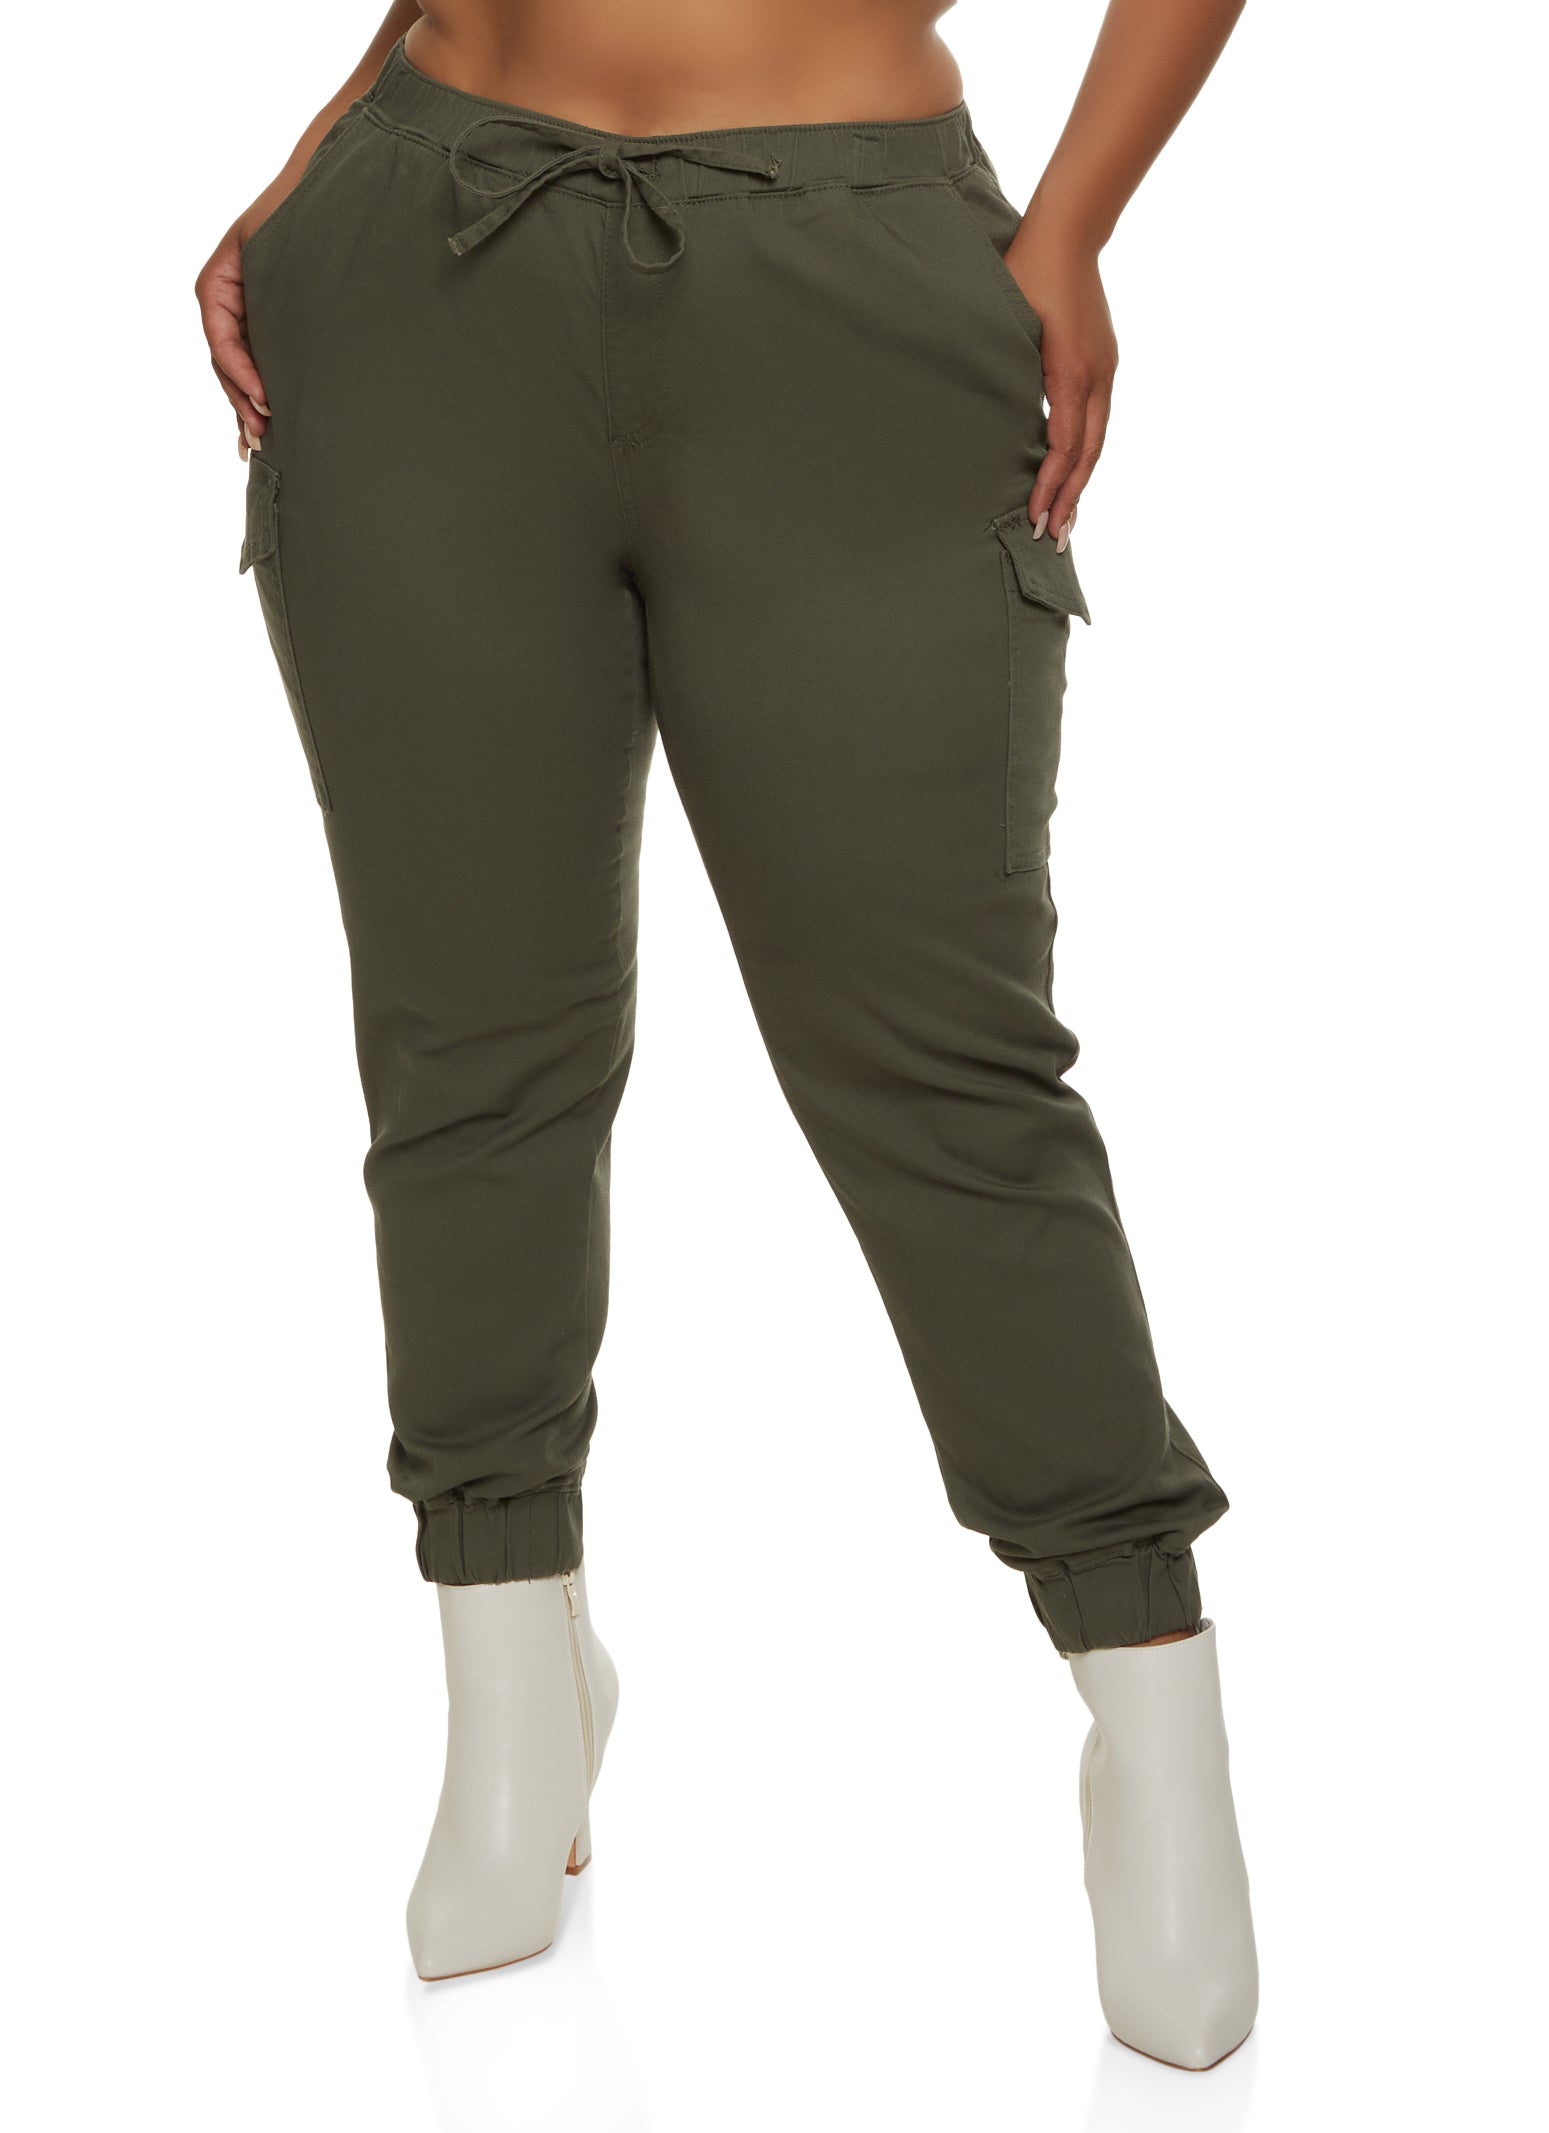 Womens Plus Size Solid Cargo Pocket Joggers, Green, Size 2X